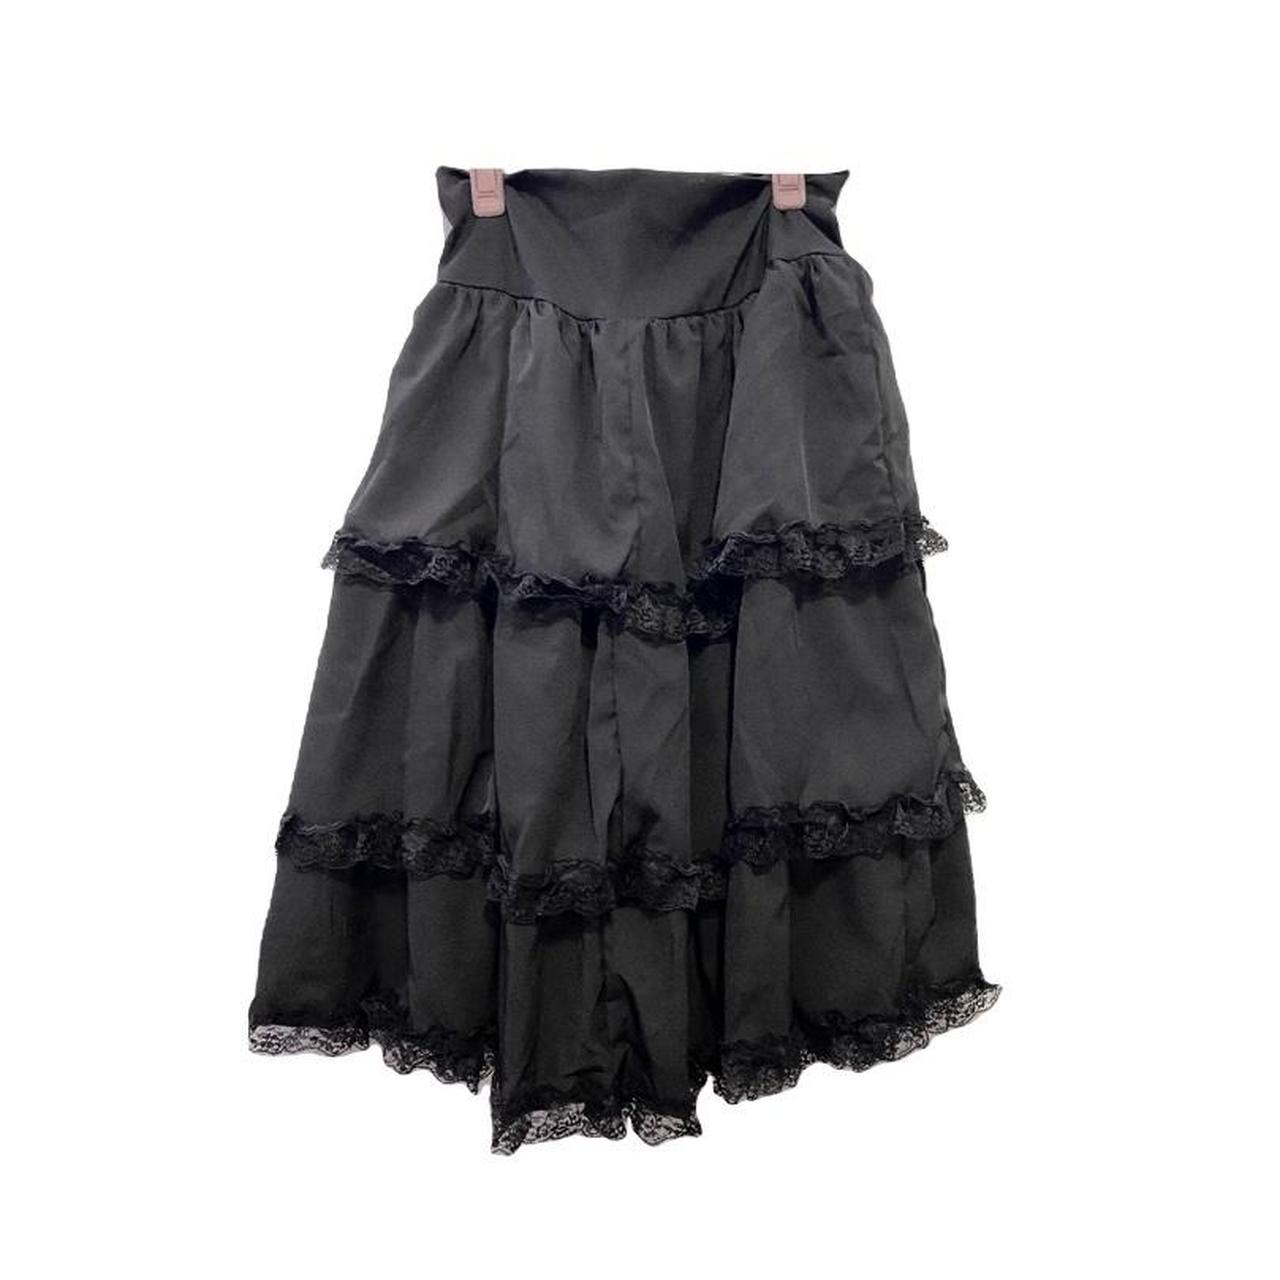 black frilly long goth lolita style skirt with... - Depop